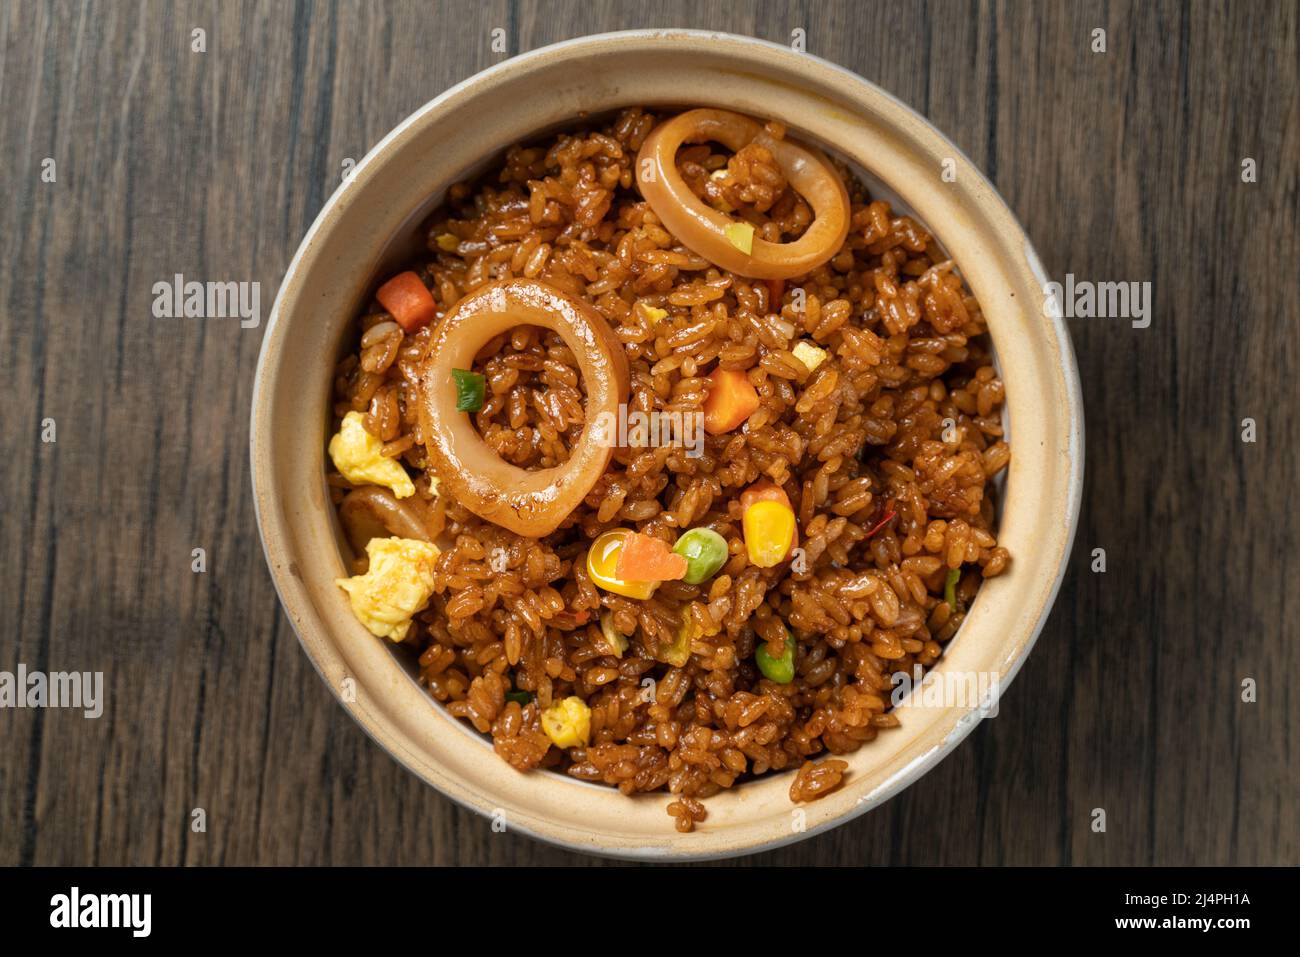 A plate of delicious fried rice with squid Stock Photo